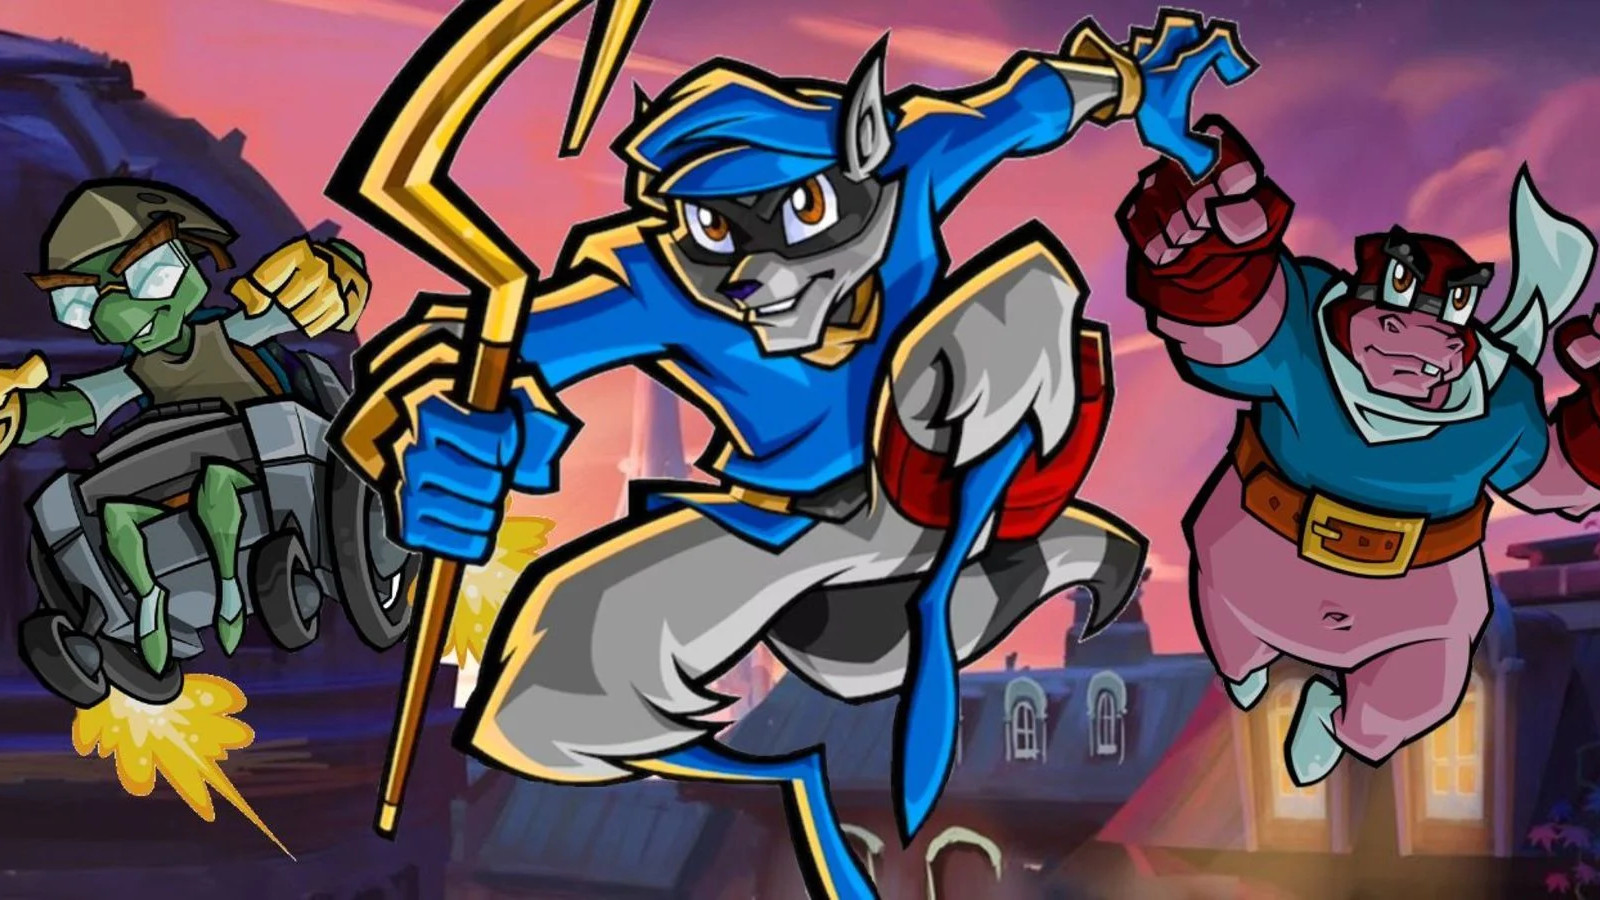 Buy Sly Cooper 5 PS4 Compare Prices